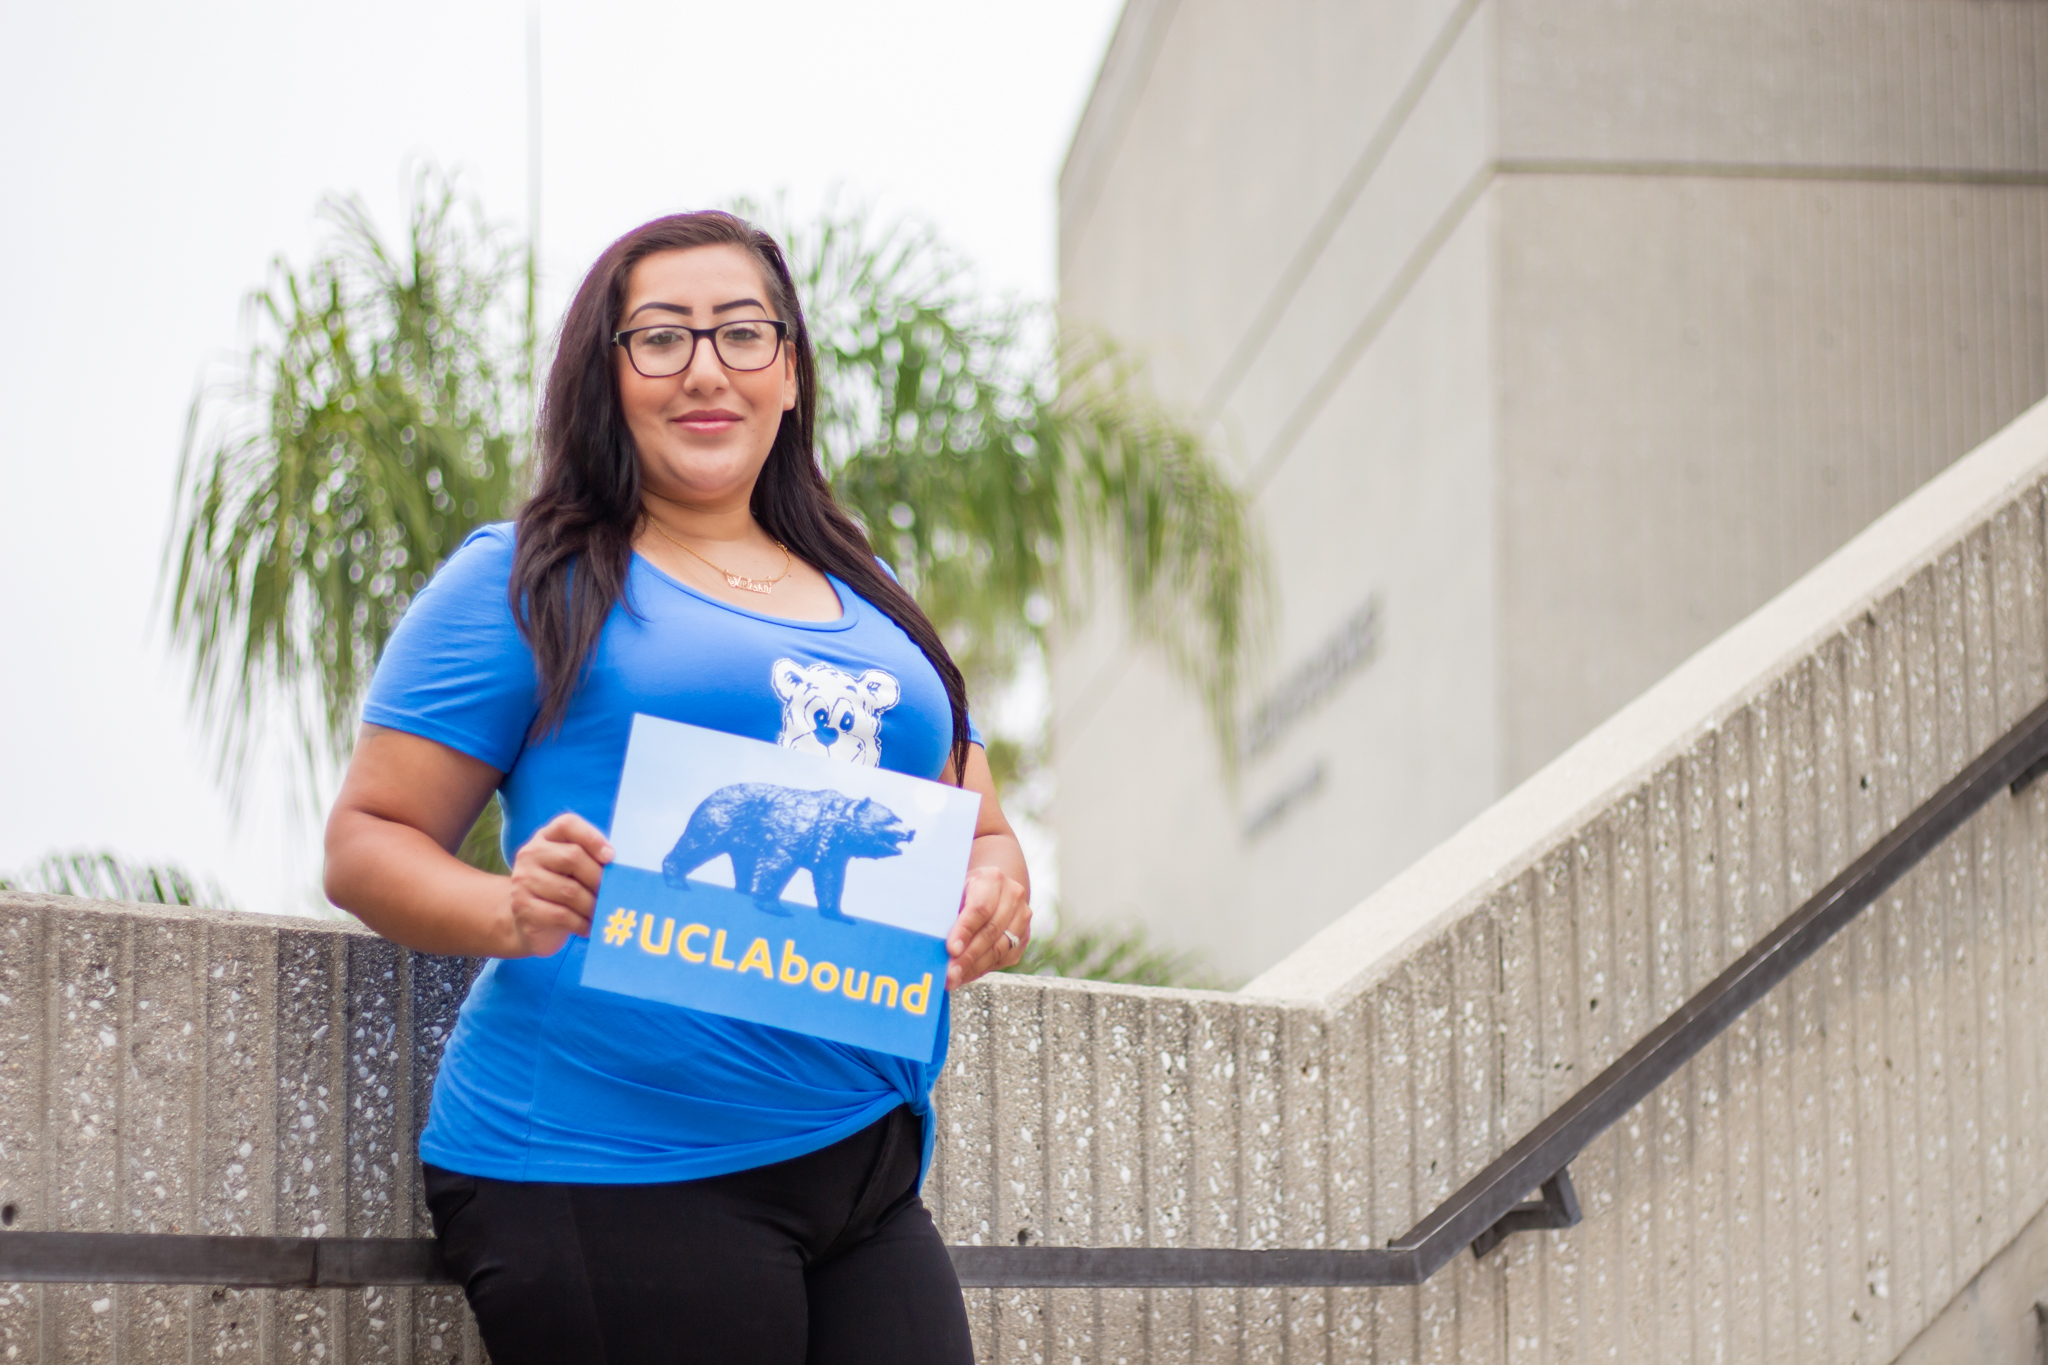 Cypress College student Melissa Whitewwater poses on the steps leading to a campus building and holds a UCLA bound sign.